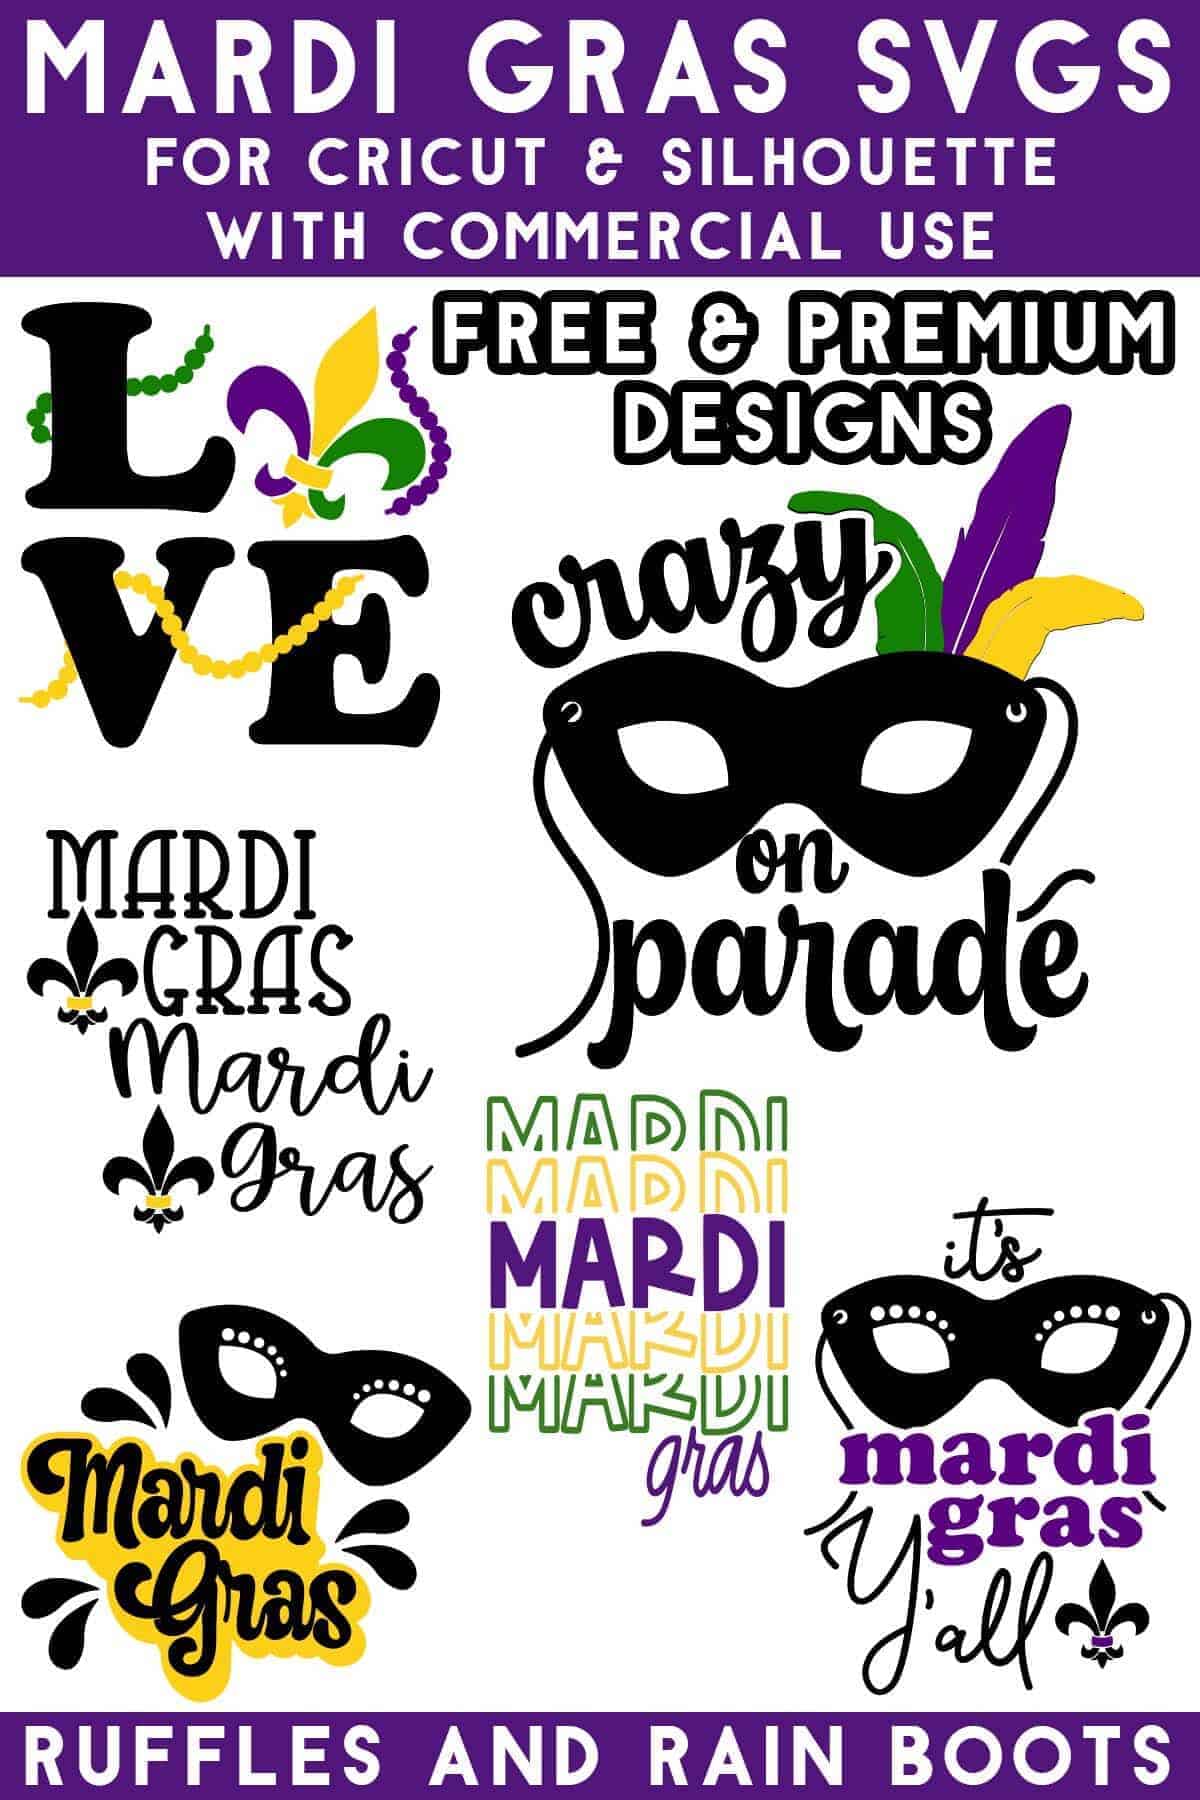 collage of mardi gras svg file from ruffles and rain boots for cricut and silhouette with commercial license.